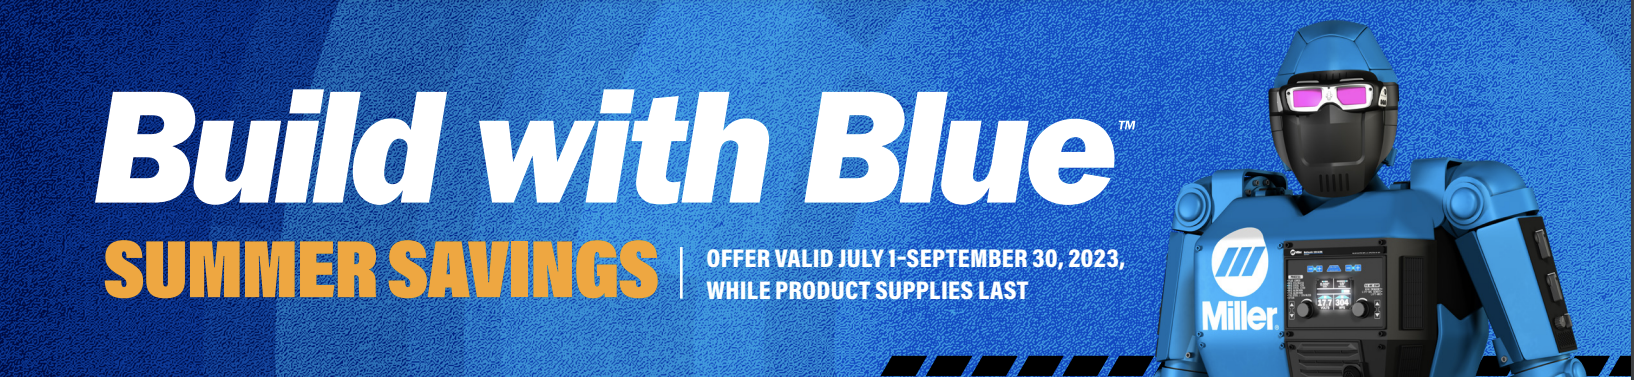 Miller Build with Blue Summer Savings